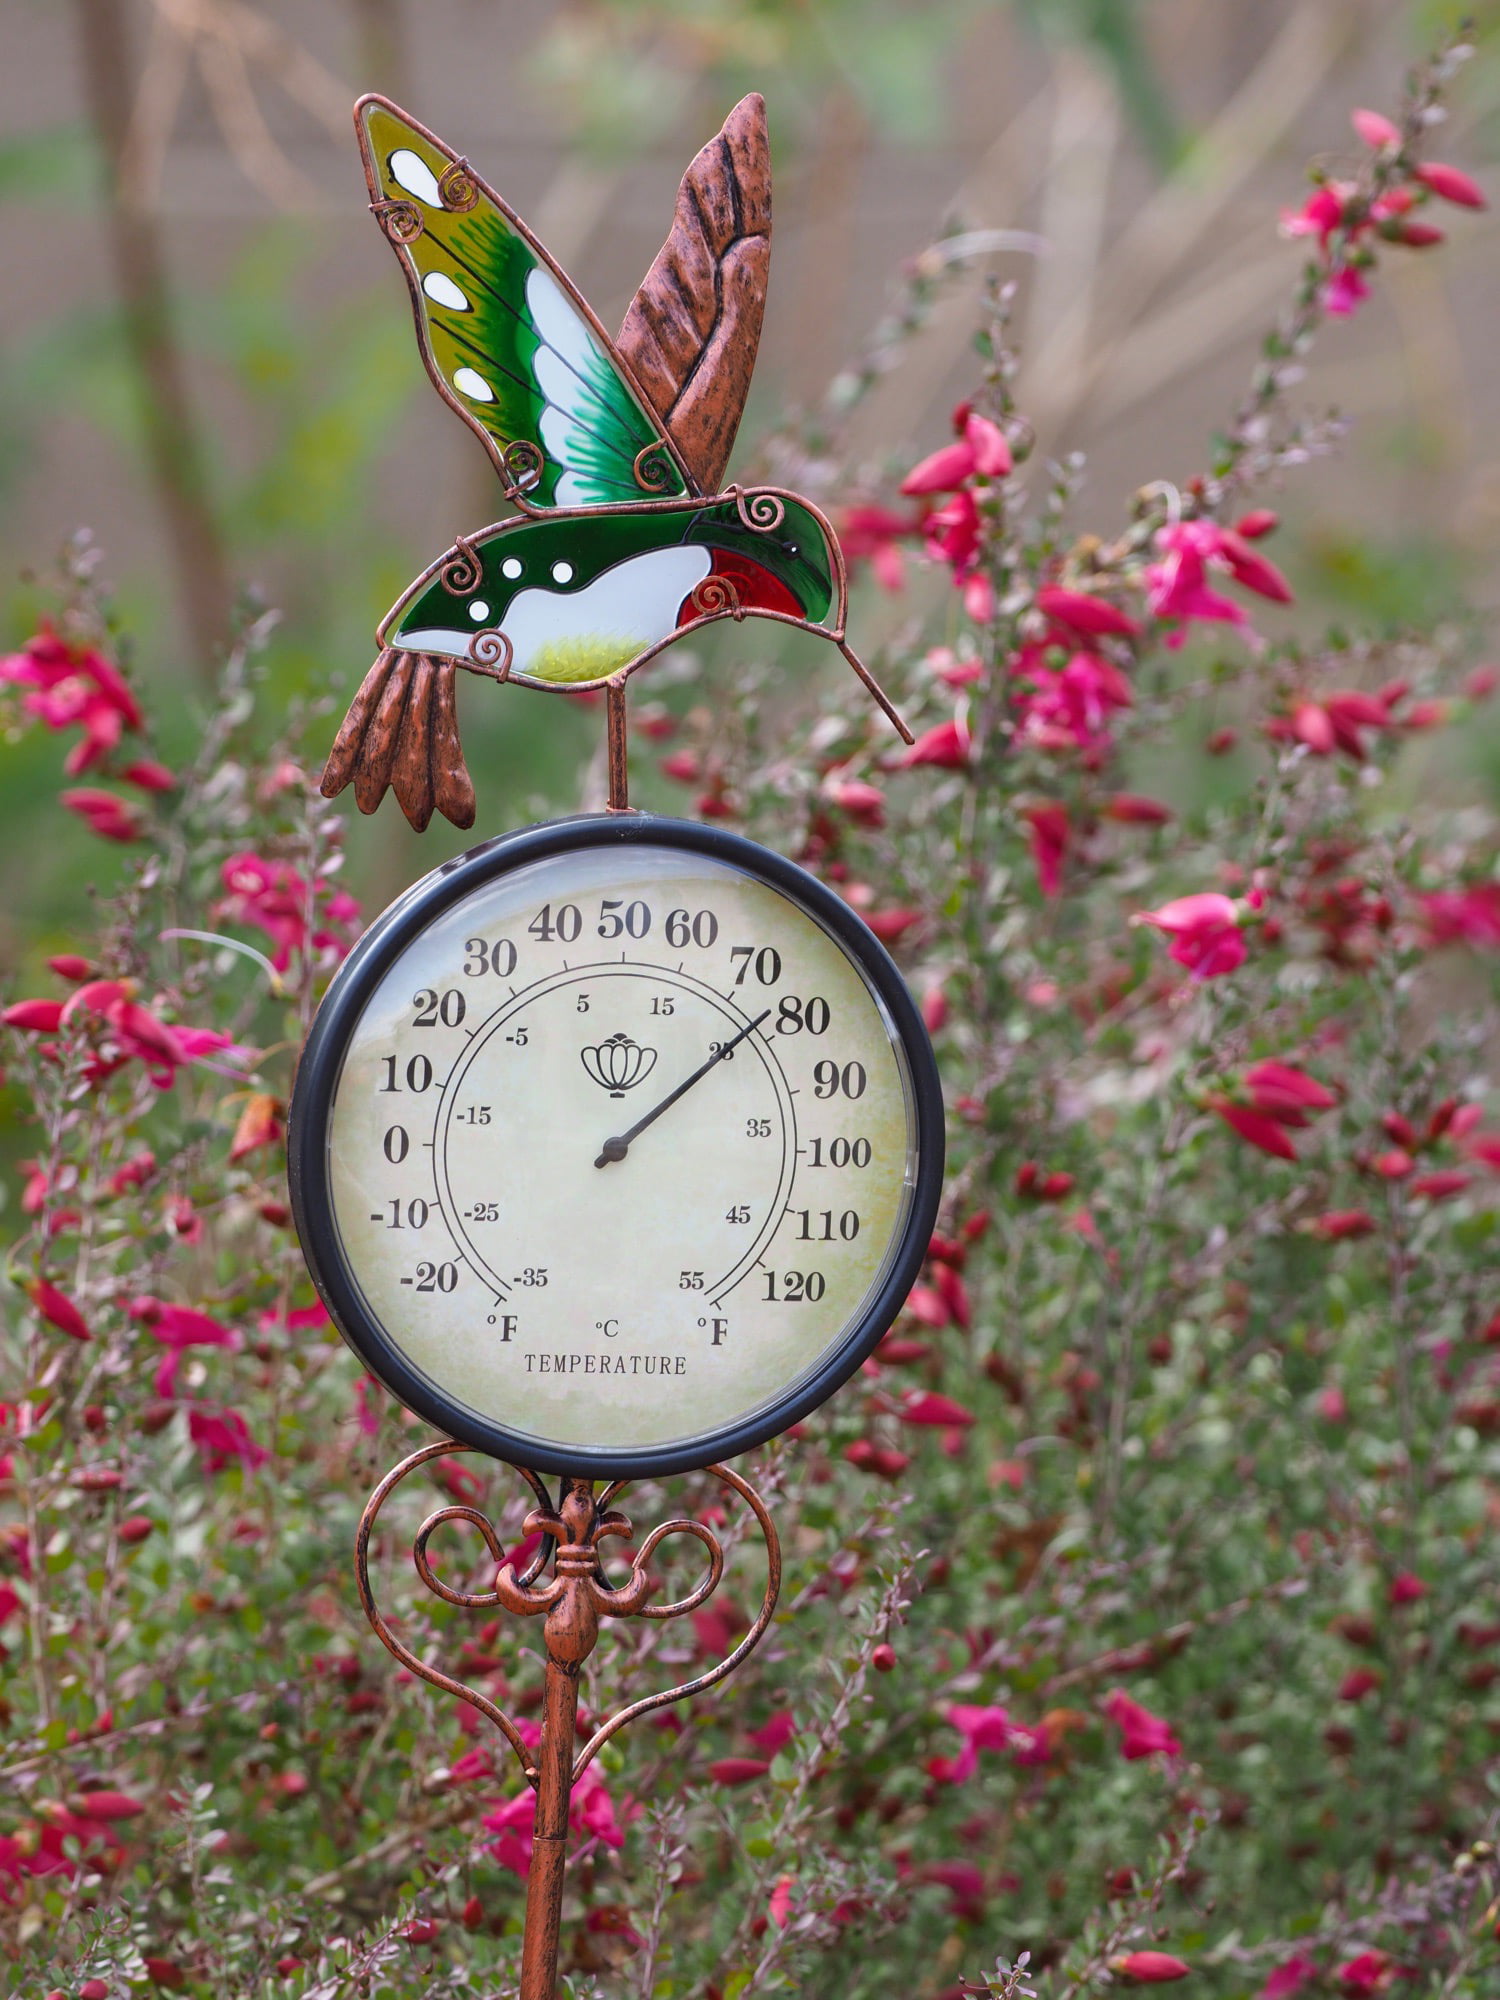 VEWOSTAR Indoor Outdoor Thermometer Hummingbird Waterproof Wall Mounted Thermometer Hanging Decor for Garden